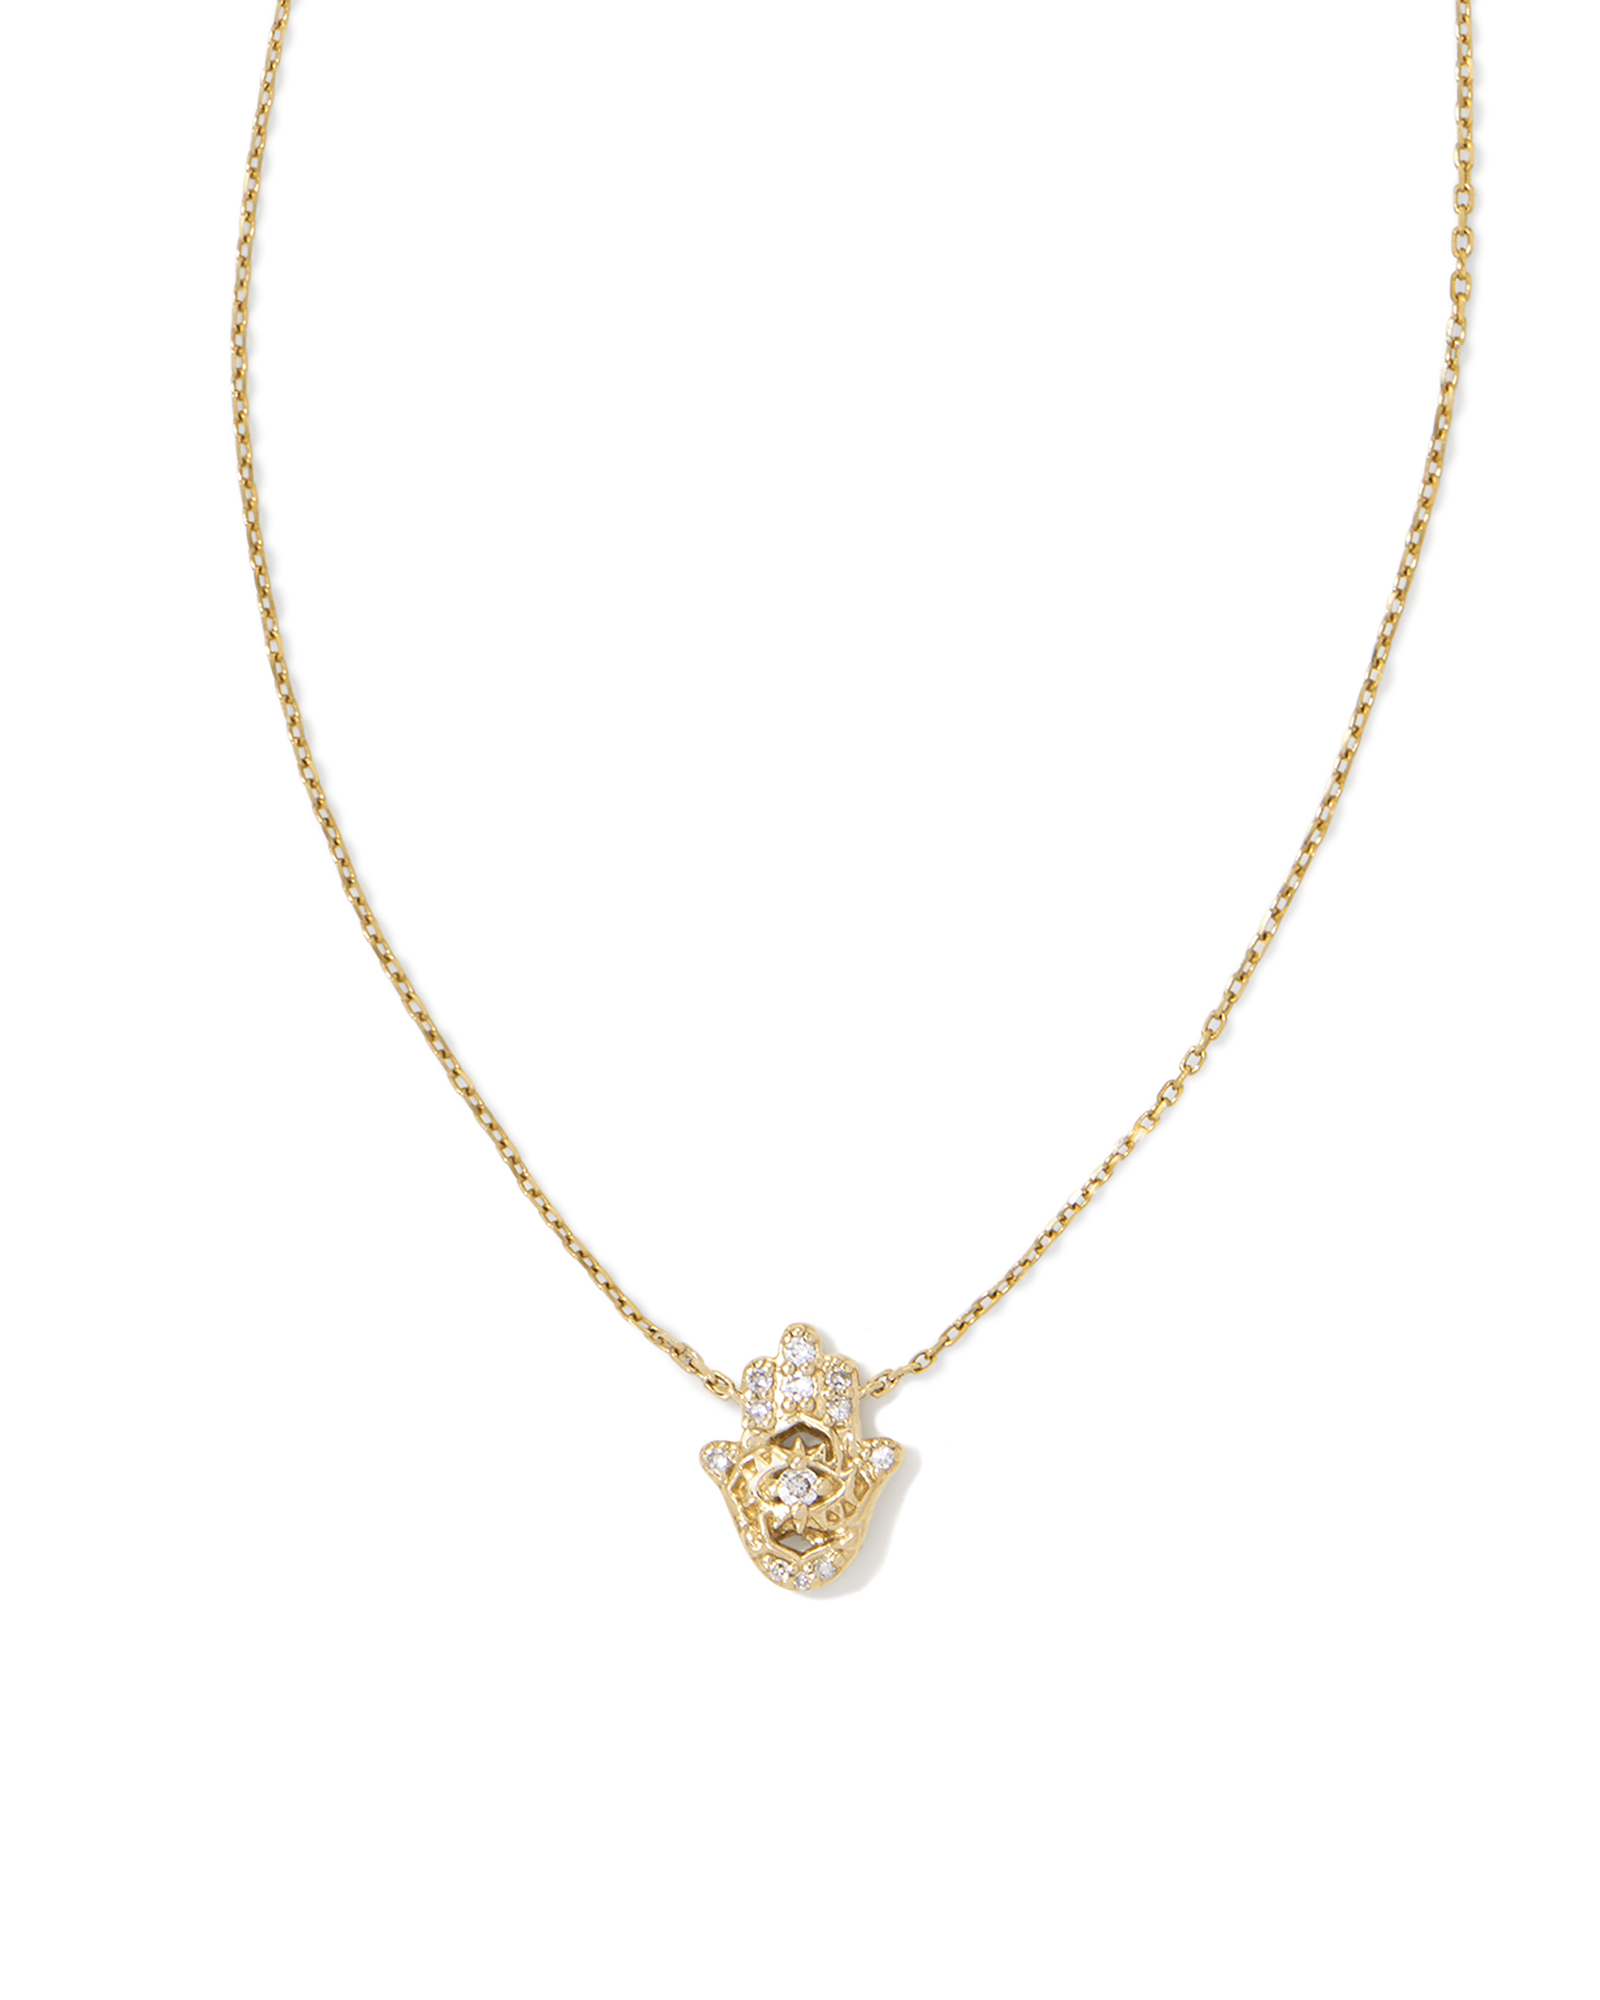 Kendra Scott Cailin Crystal Pendant Necklace Gold Golden Yellow Crysta –  Fabtique Clothing